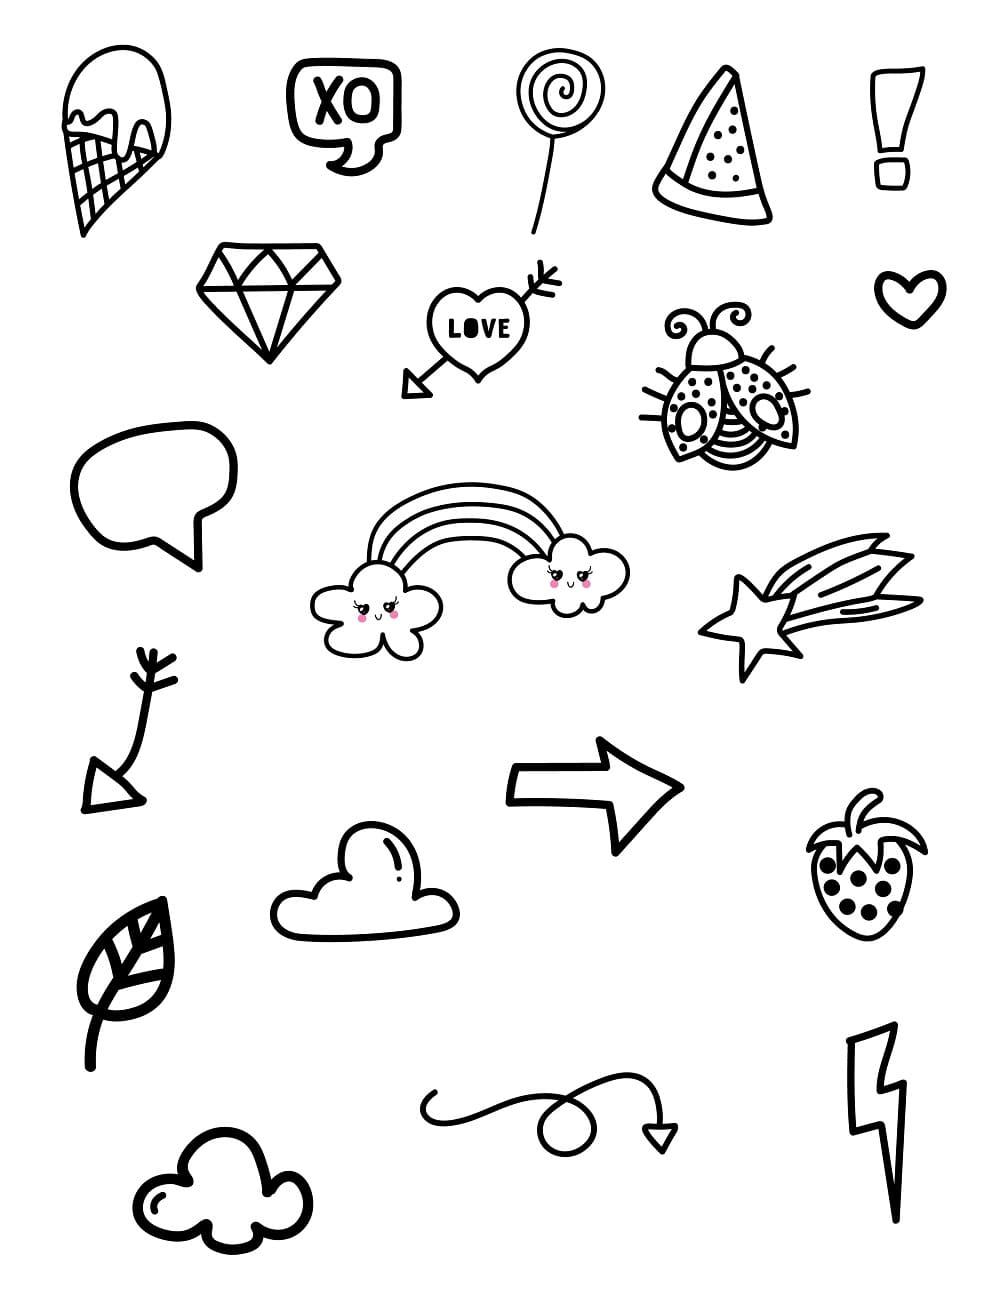 Easy Stickers Coloring Page - Free Printable Coloring Pages for Kids